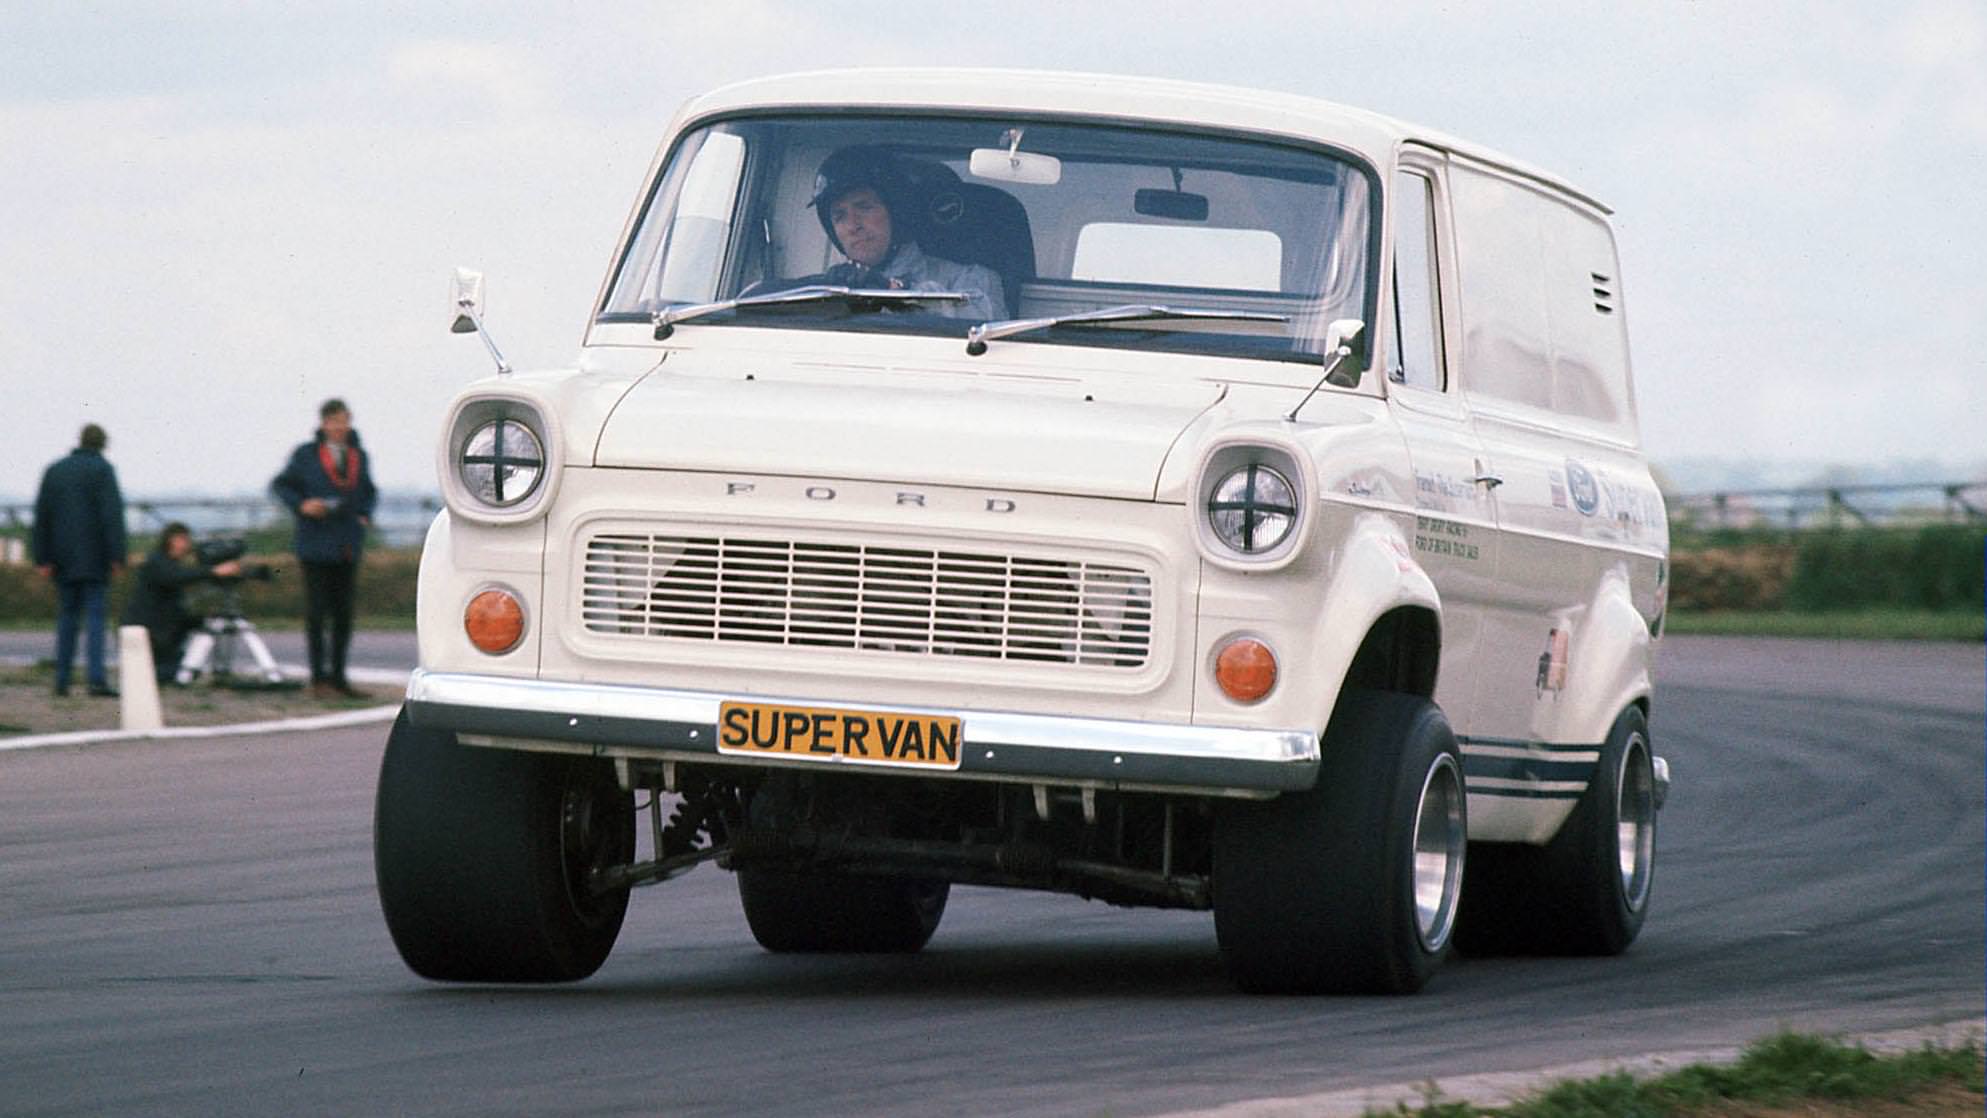 The Ford Supervan – A Van Built On A GT40 Chassis With A 435 HP V8 via @Silodrome